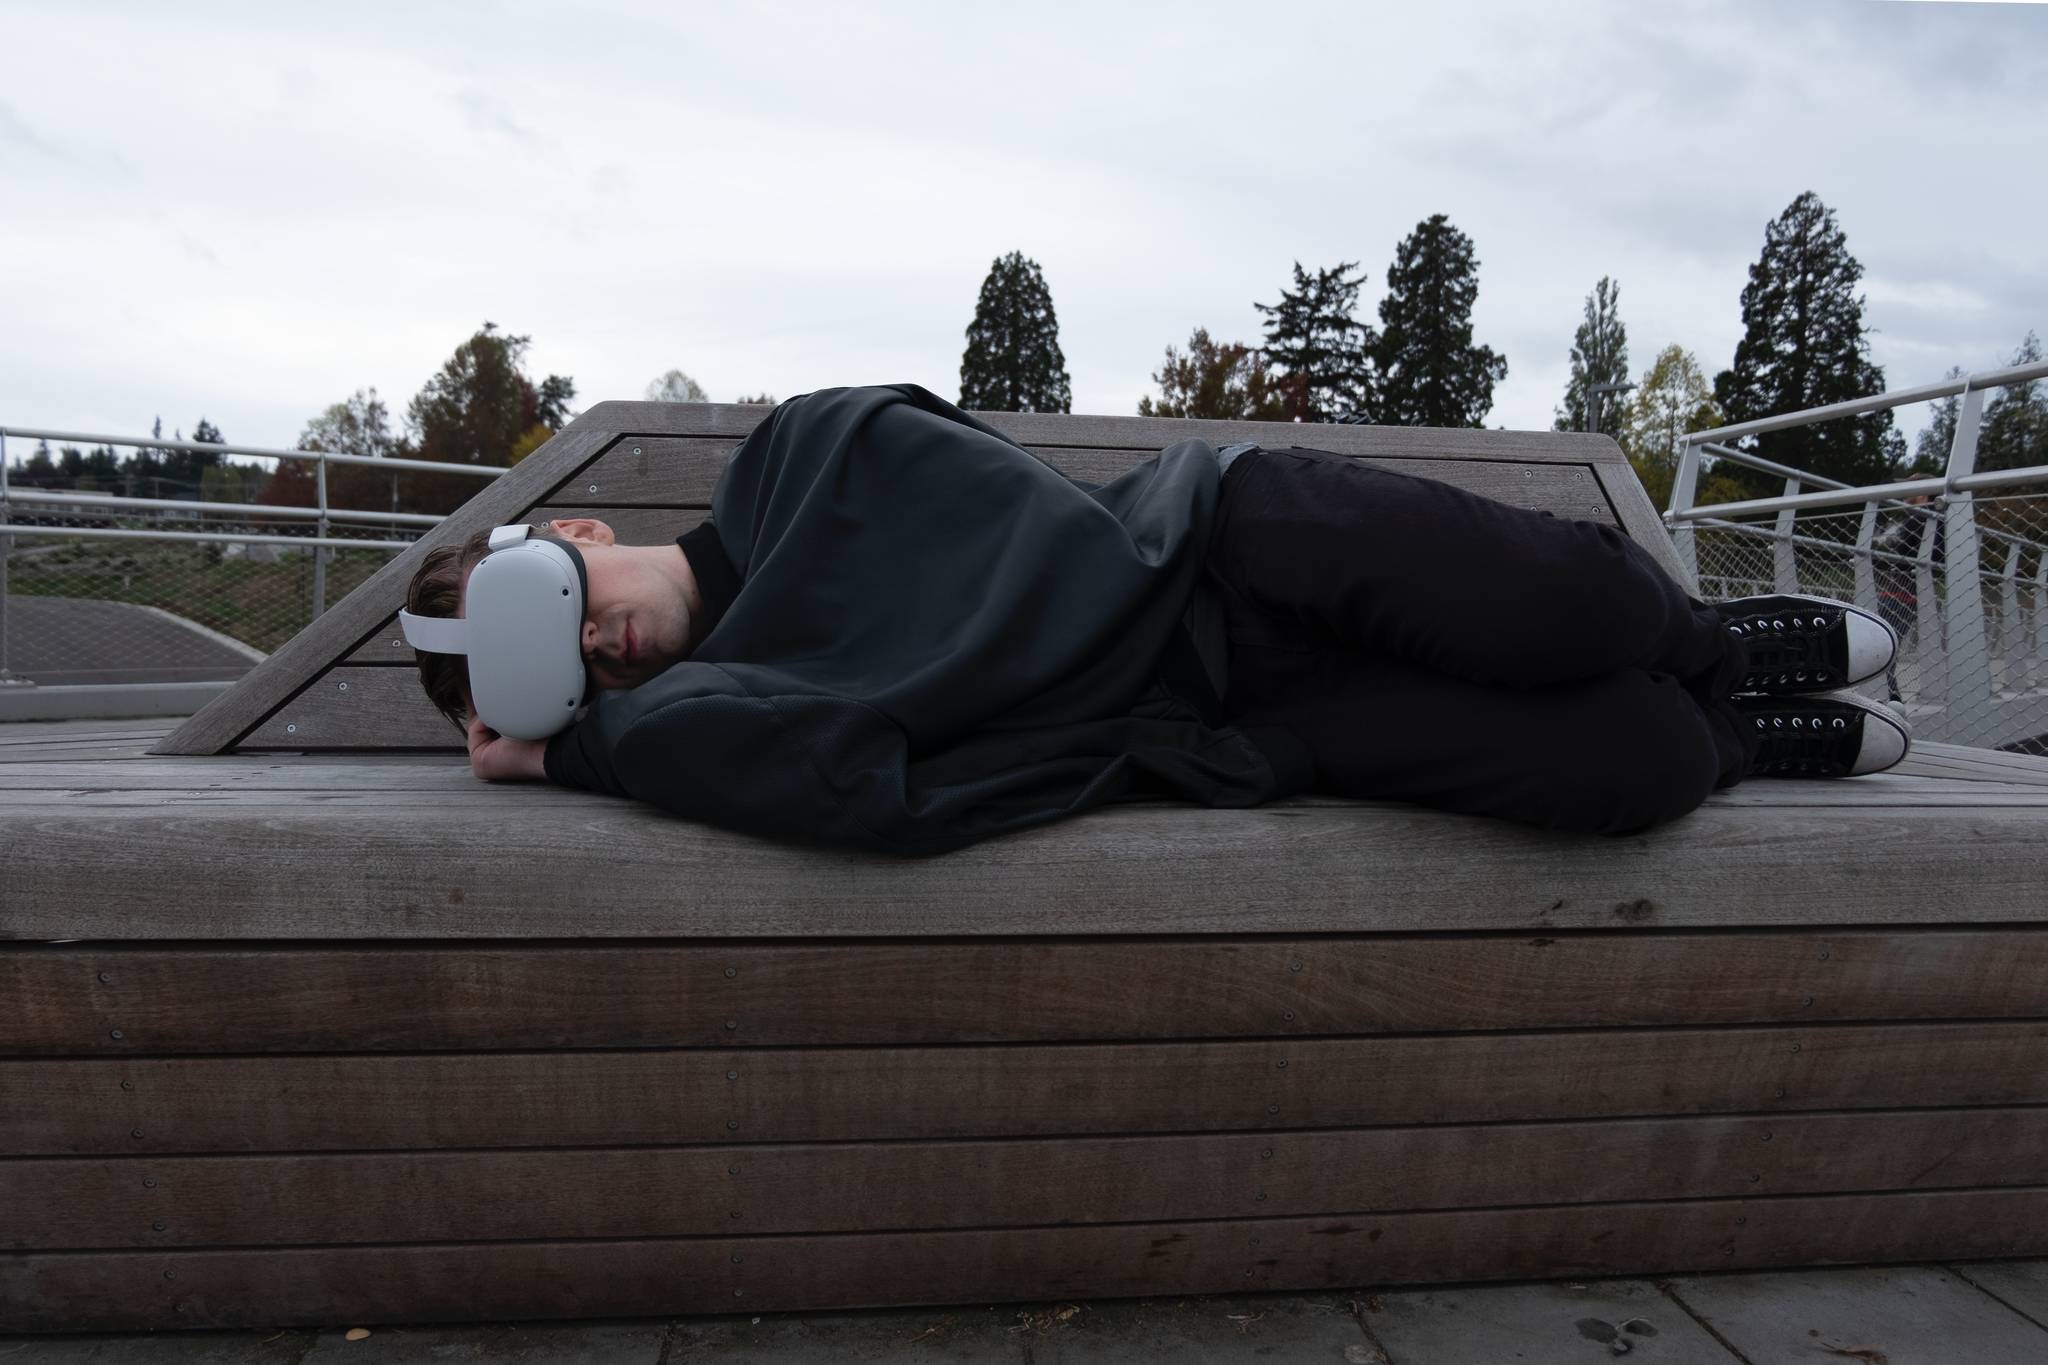 VR sleep rooms offer an alternative reality for rest